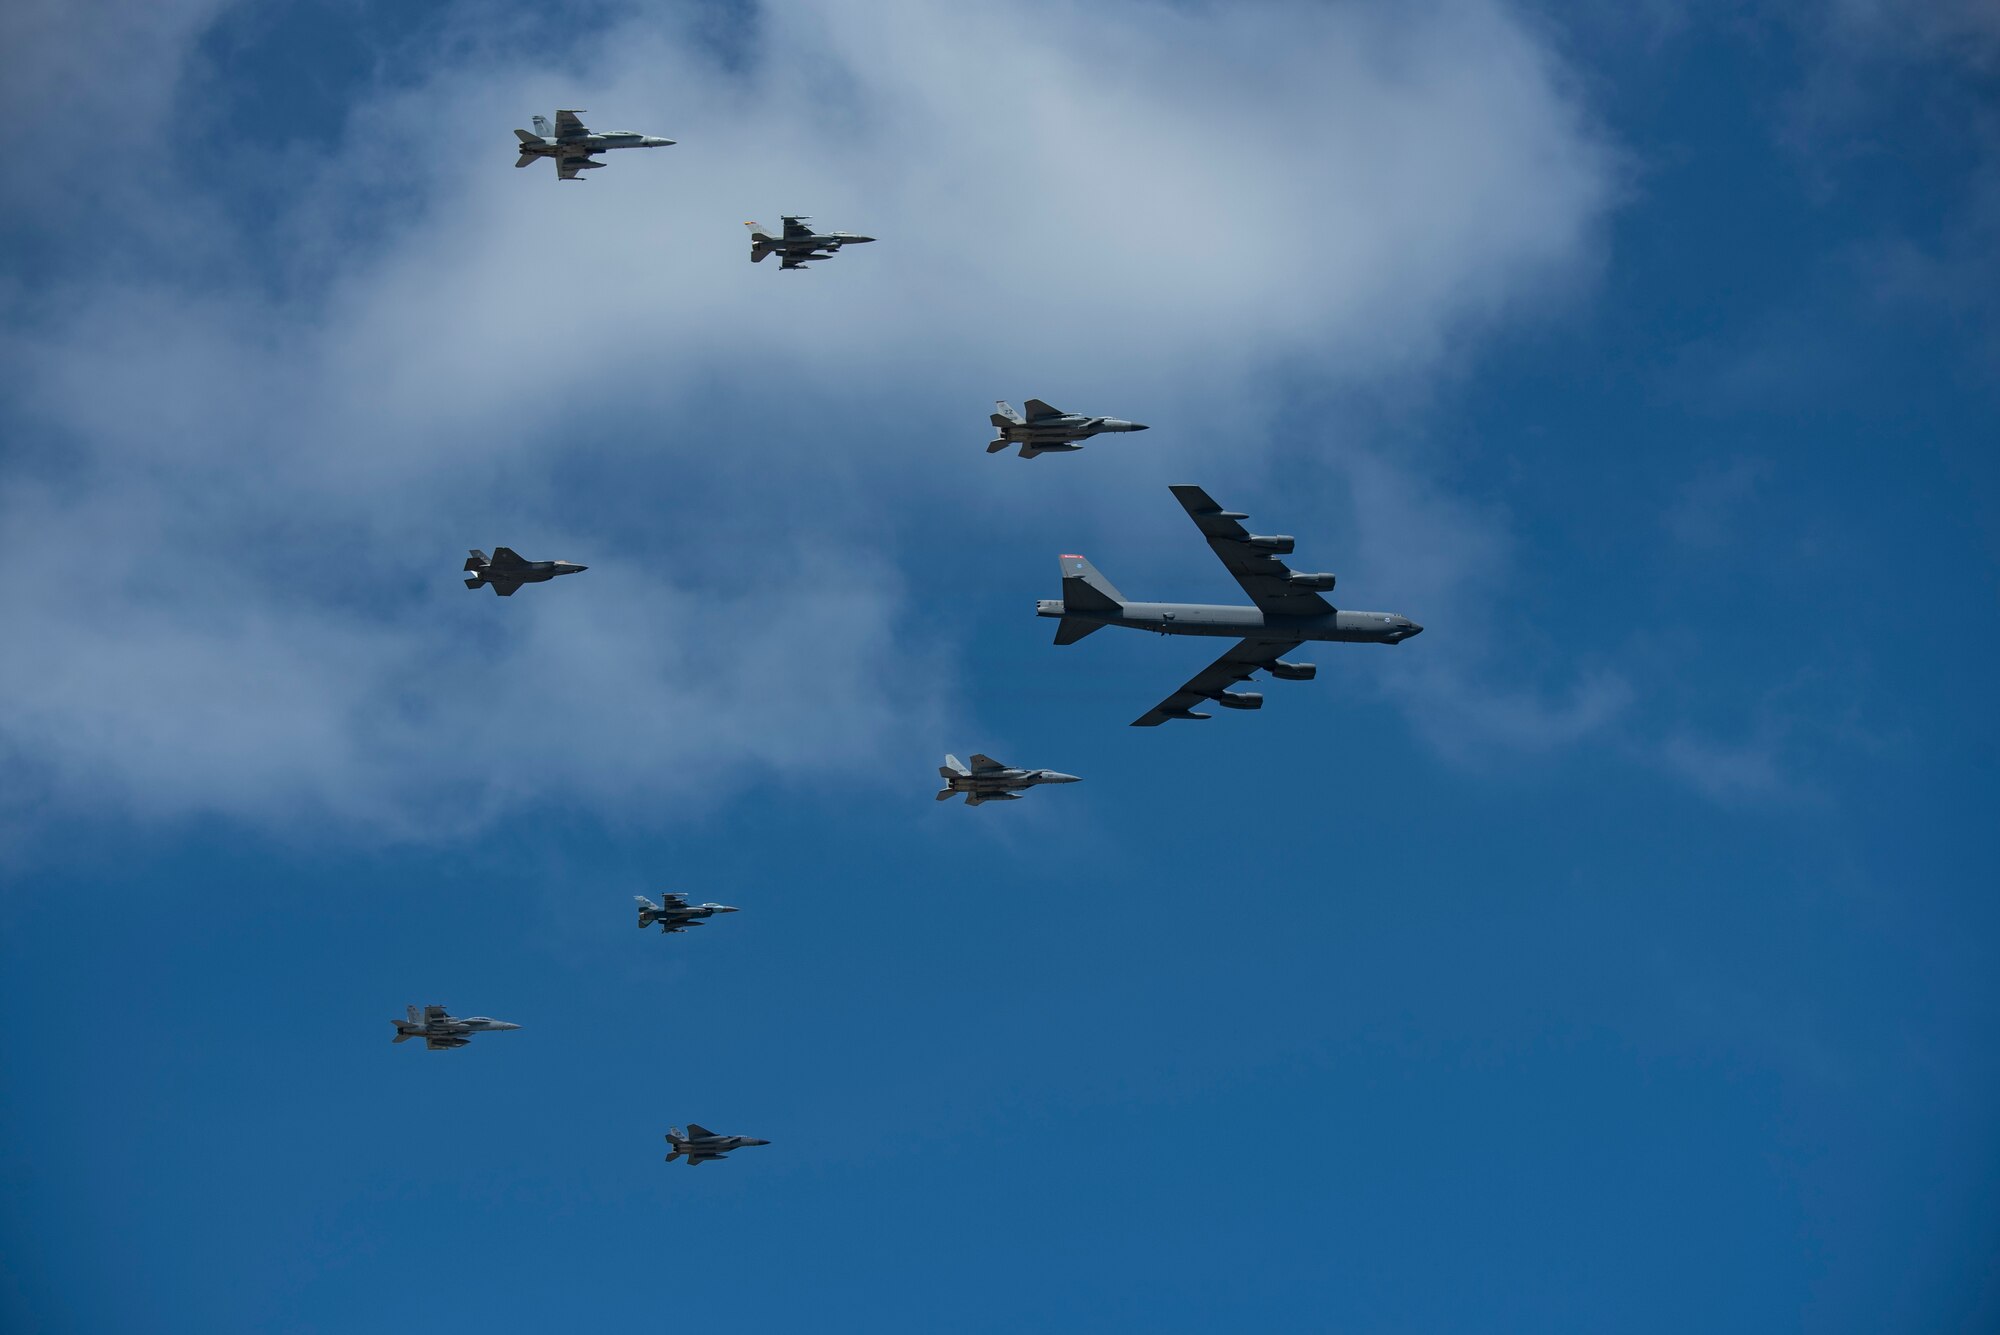 U.S. Air Force, Japan Air Self-Defense Force and Royal Australian Air Force aircraft fly in formation during exercise Cope North 21 at Andersen Air Force Base, Guam, Feb. 9, 2021.